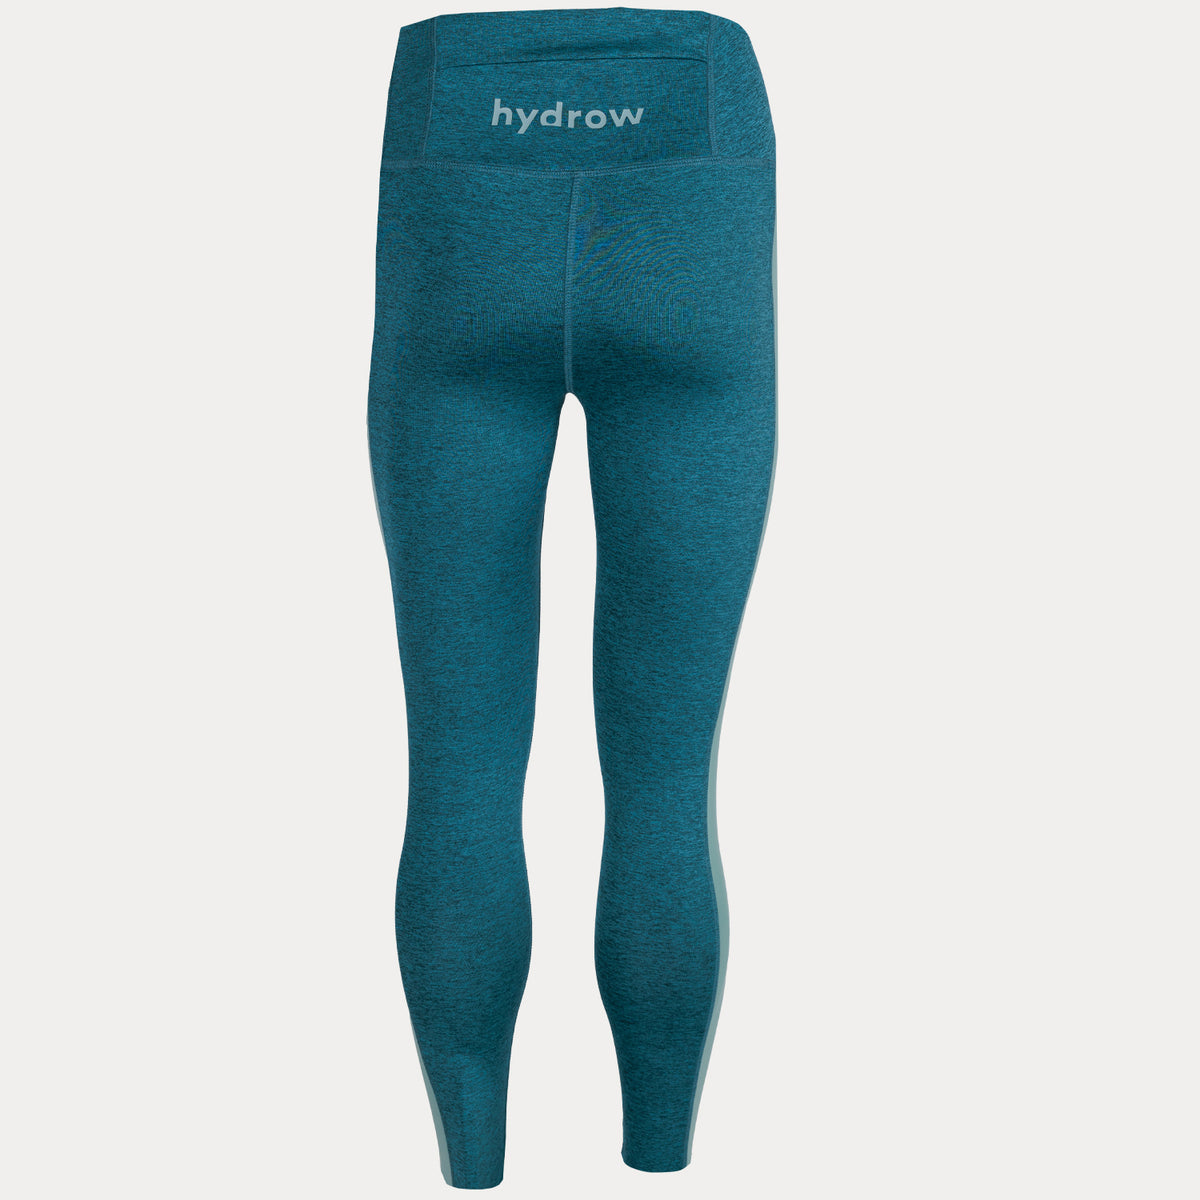 back  view of heathered leggings in dark blue with hydrow logo on rear upper